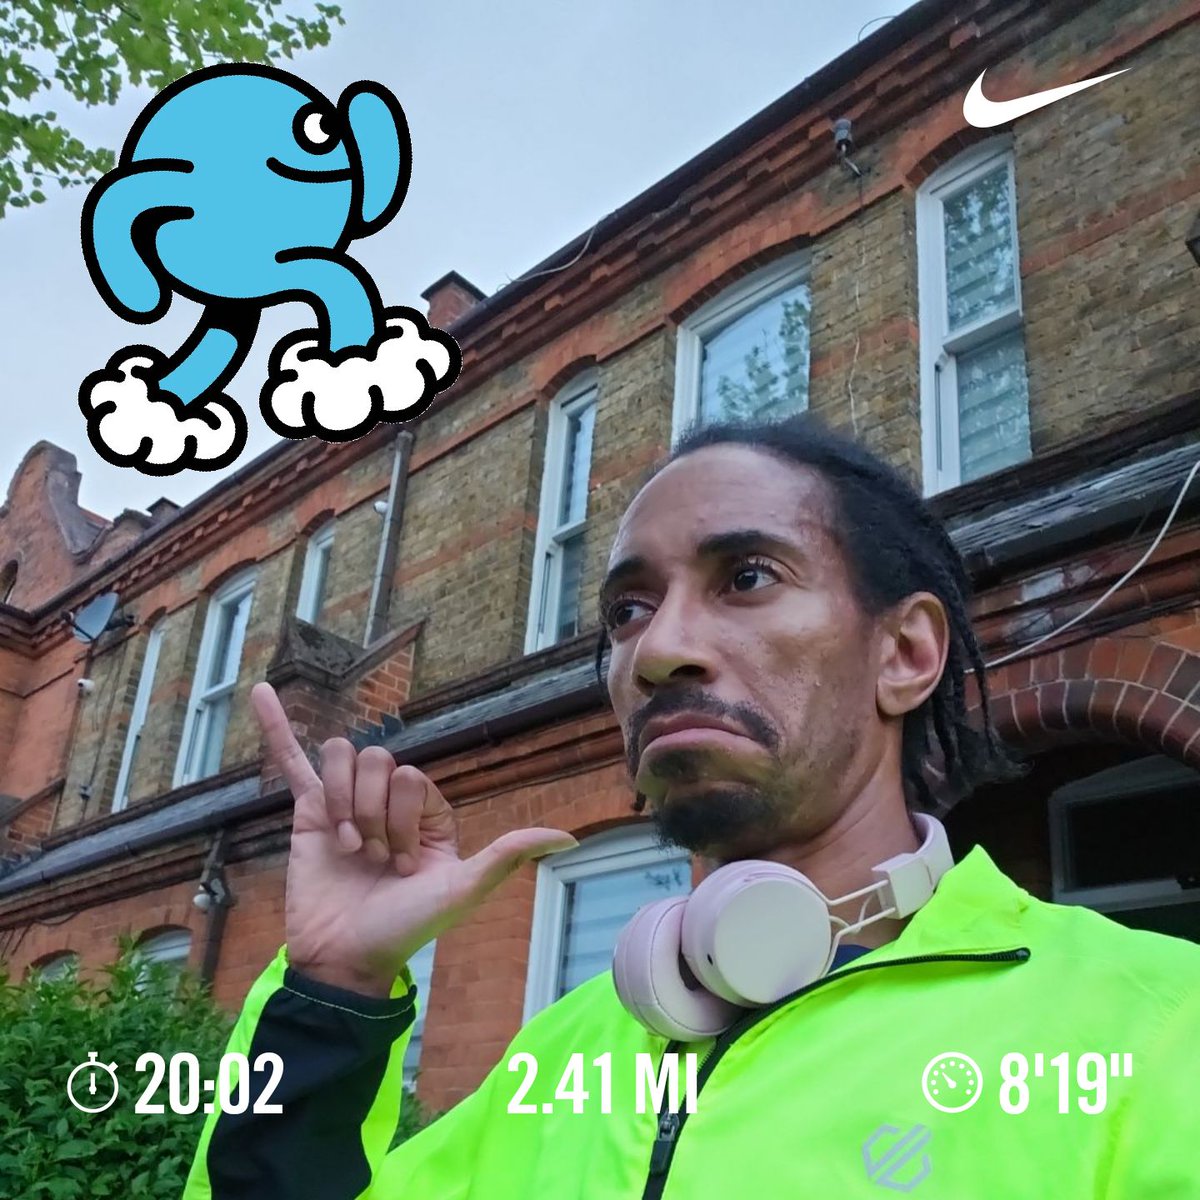 A long day at work. So I really needed this shoer run. Wanted to do a longer run but didn't have the time but it still helped. Have a lovely evening everyone. #kylevstheworld #changetheworld  #gottagofast #running #ukrunchat @UKRunChat